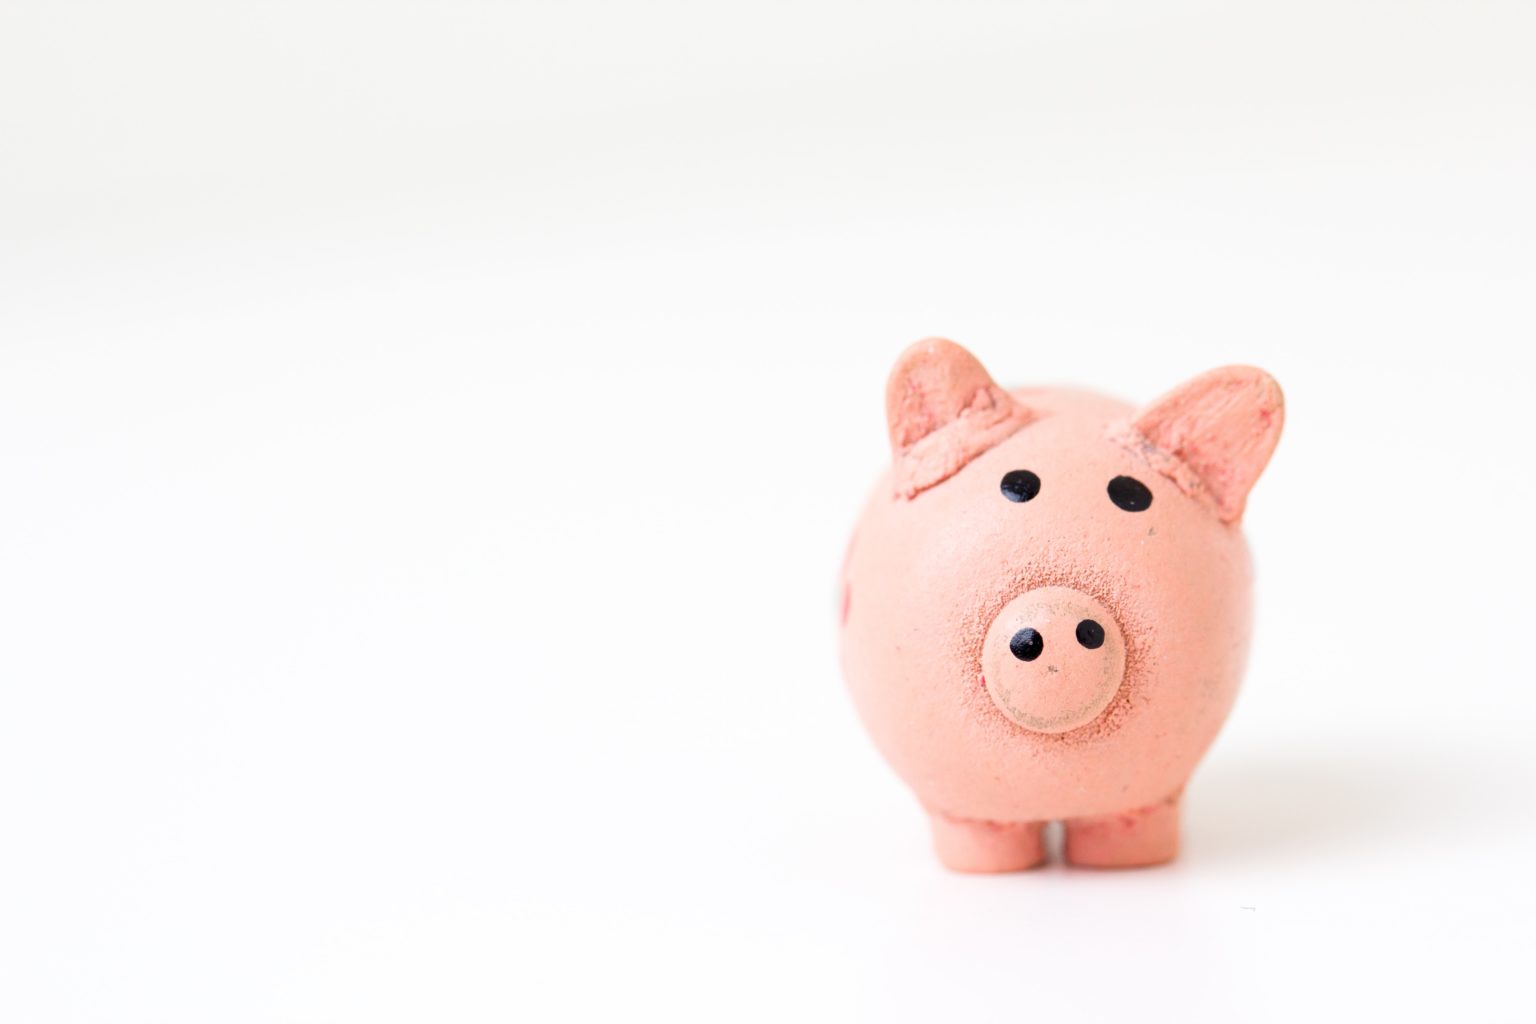 Pink piggy bank against white background